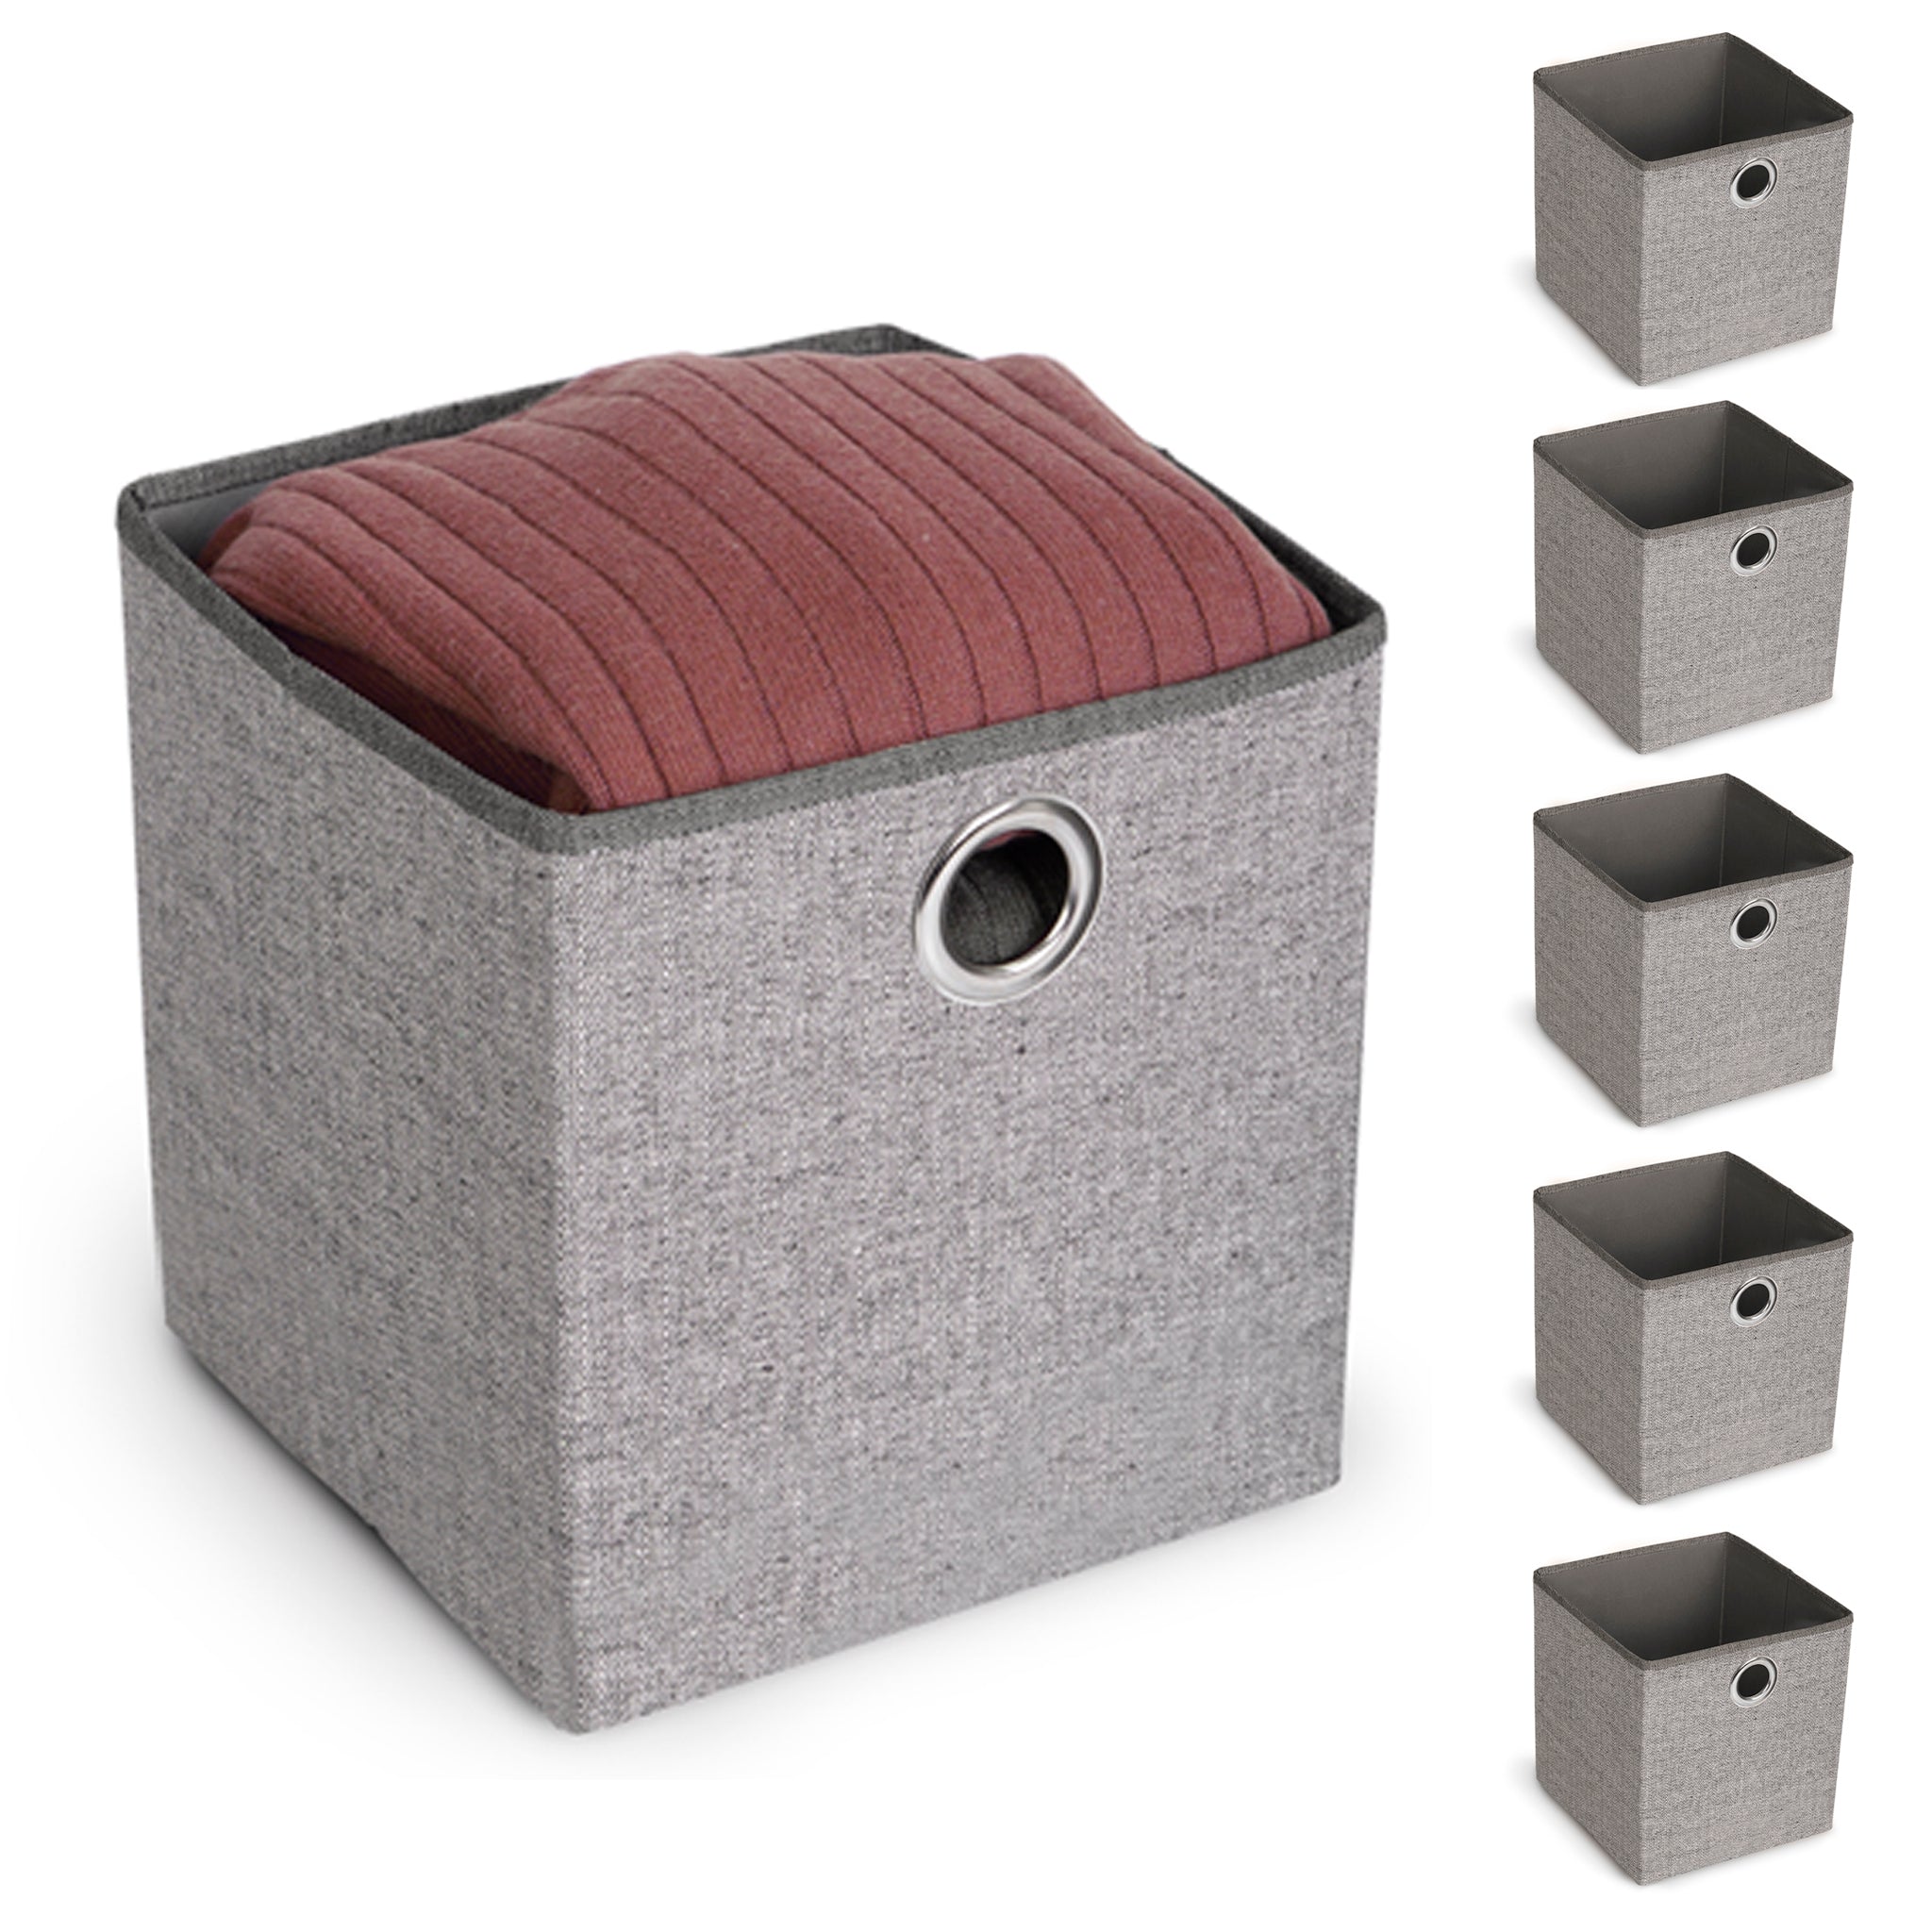 Cube Organizer with Riveted Reinforced Handles - Set of 6 - Gray - Smart Design® 1